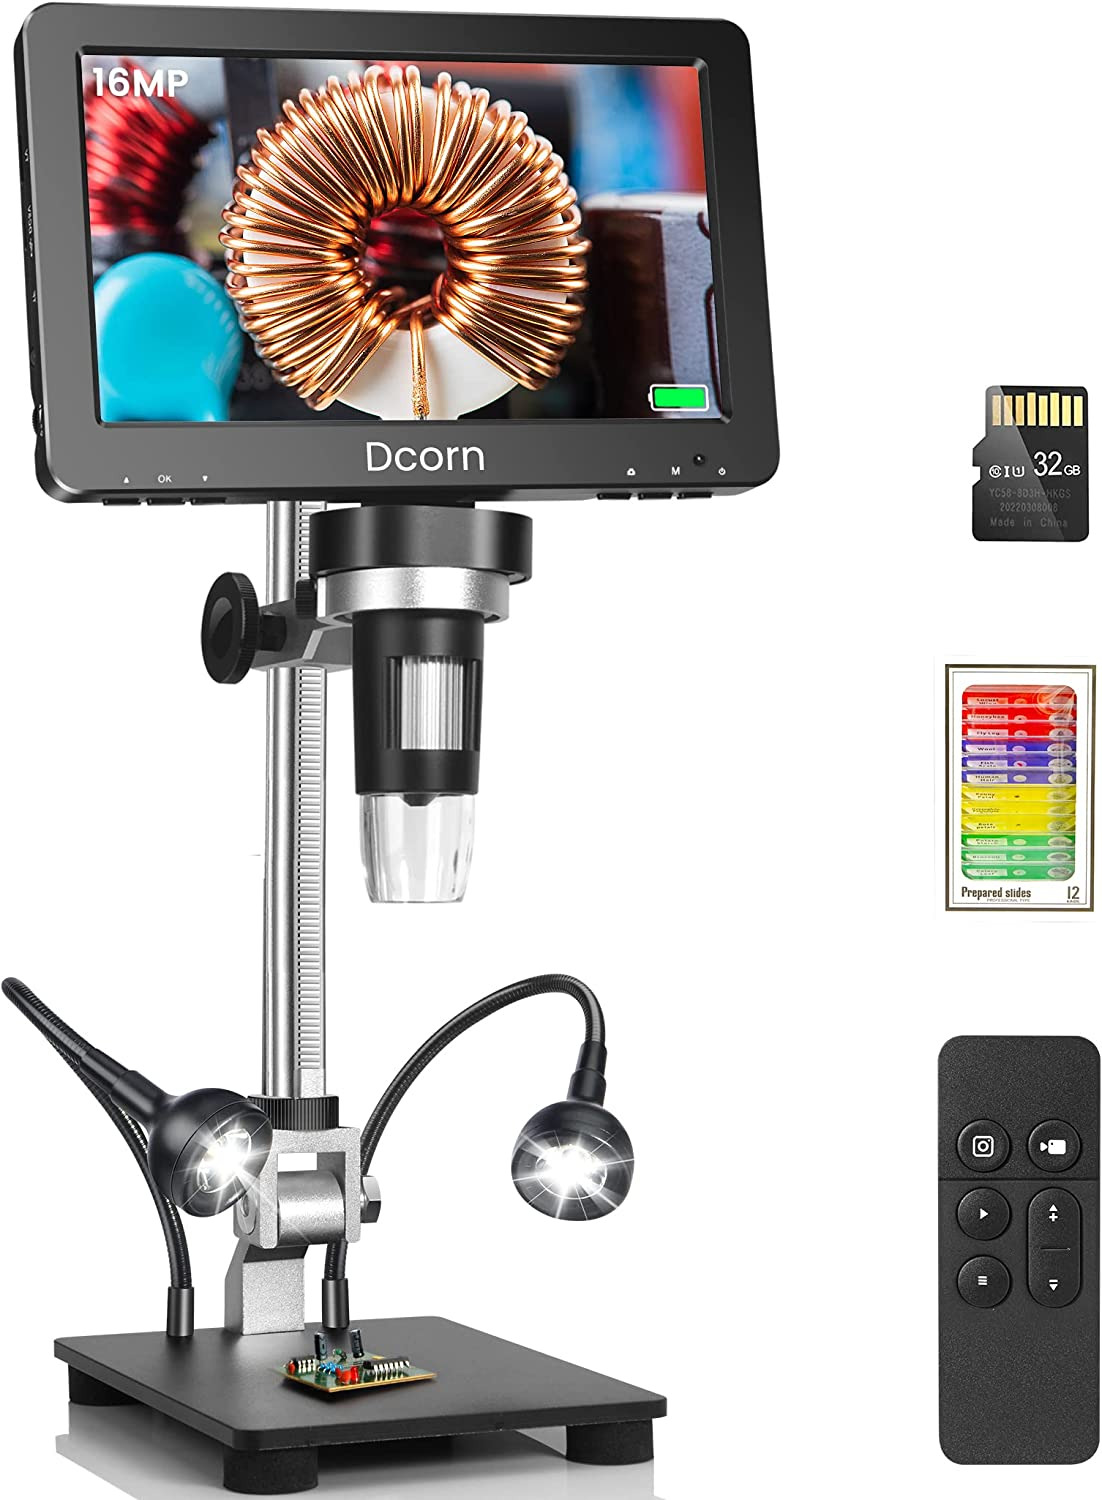 16MP Soldering Microscope with Lights for Adults | HDMI LCD Digital Microscope